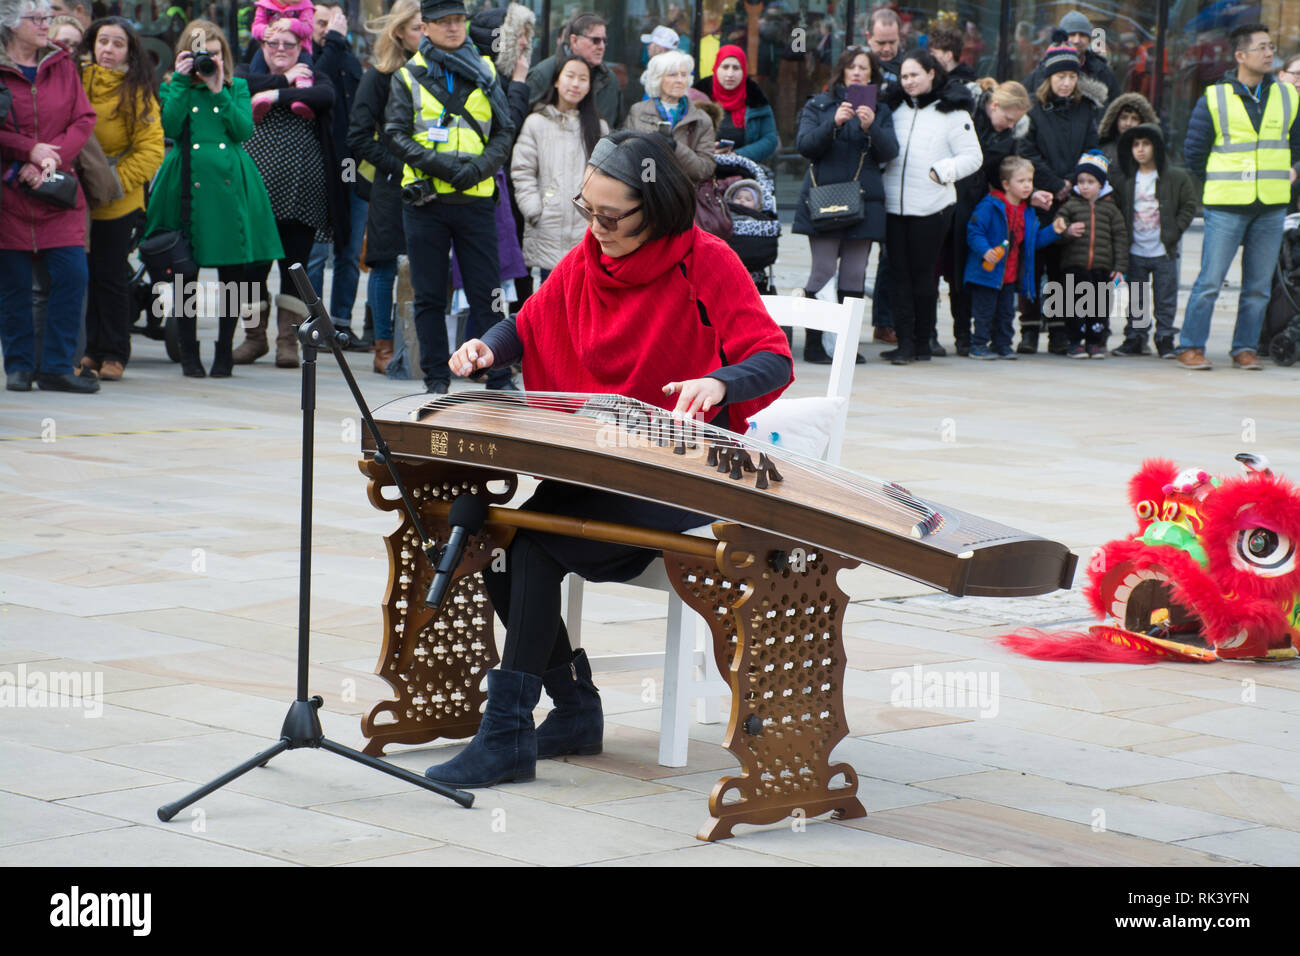 Woking, Surrey, UK. 9th February, 2019. Woking town centre celebrated the Chinese New Year of the Pig today with colourful parades and shows. A solo musical performance on the Chinese zither or guzheng. Stock Photo